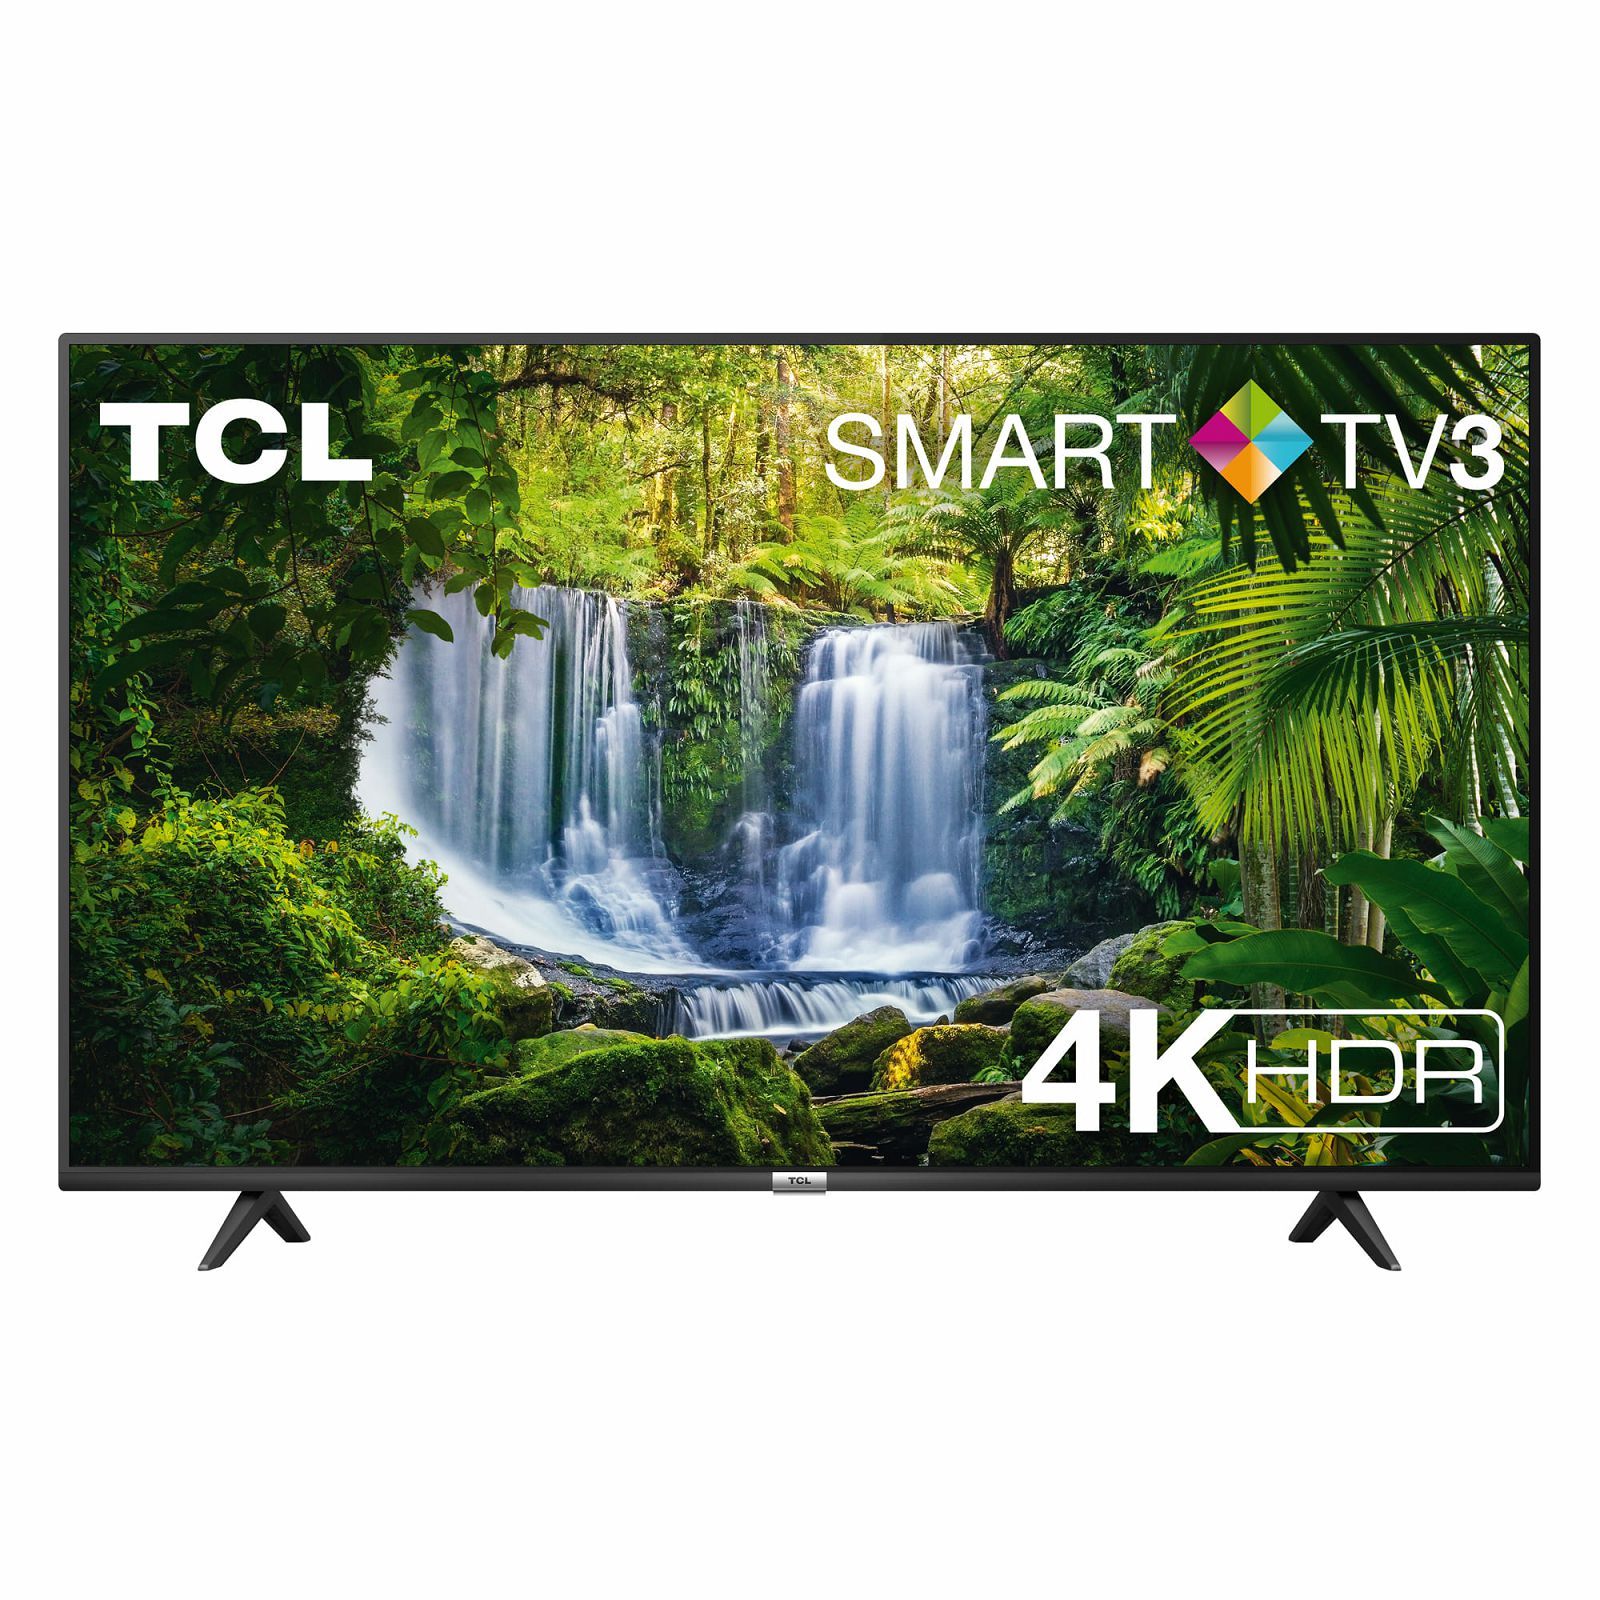 tcl-led-tv-32-32s6200-hd-android-tv-65589_1.jpg